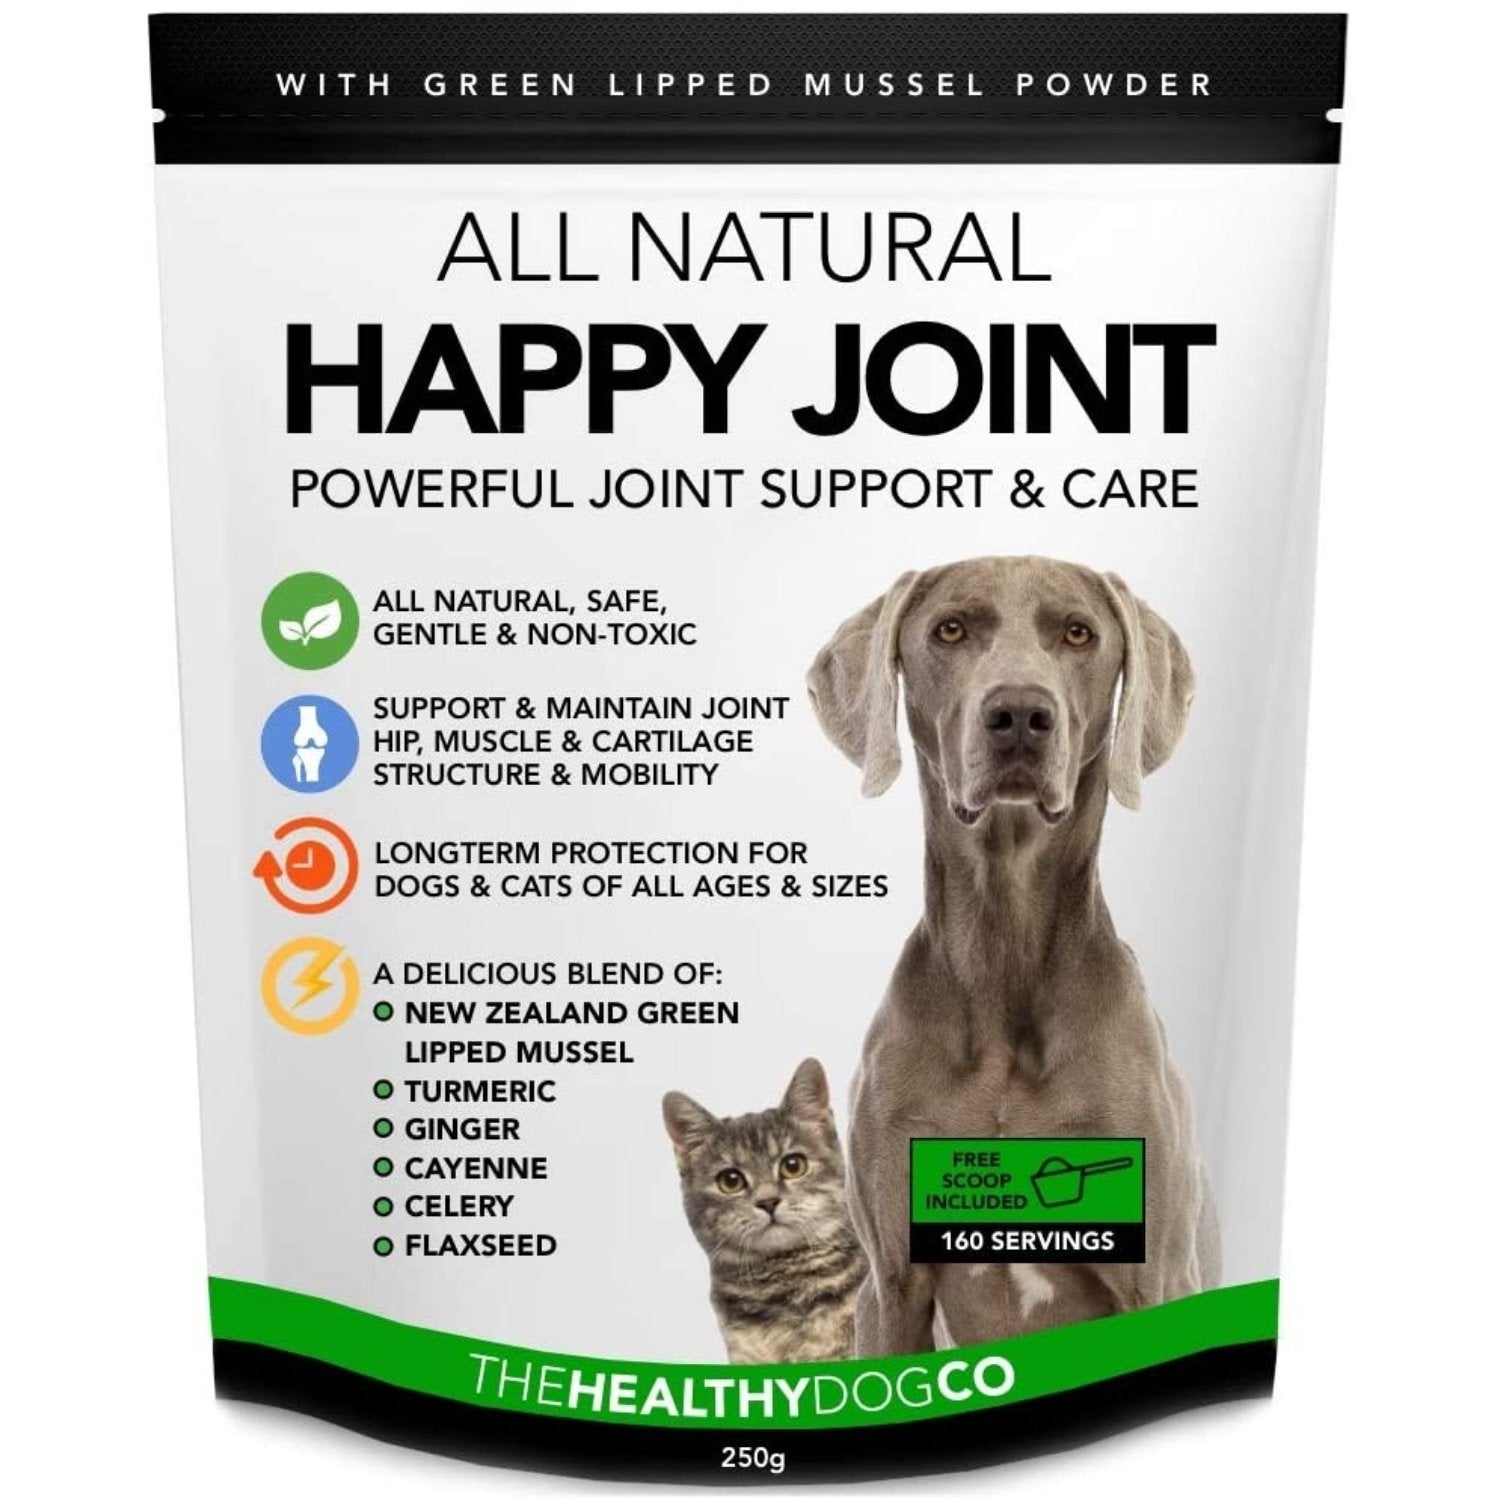 All-Natural Happy Joint Care for Dogs Cats - The Healthy Dog Co